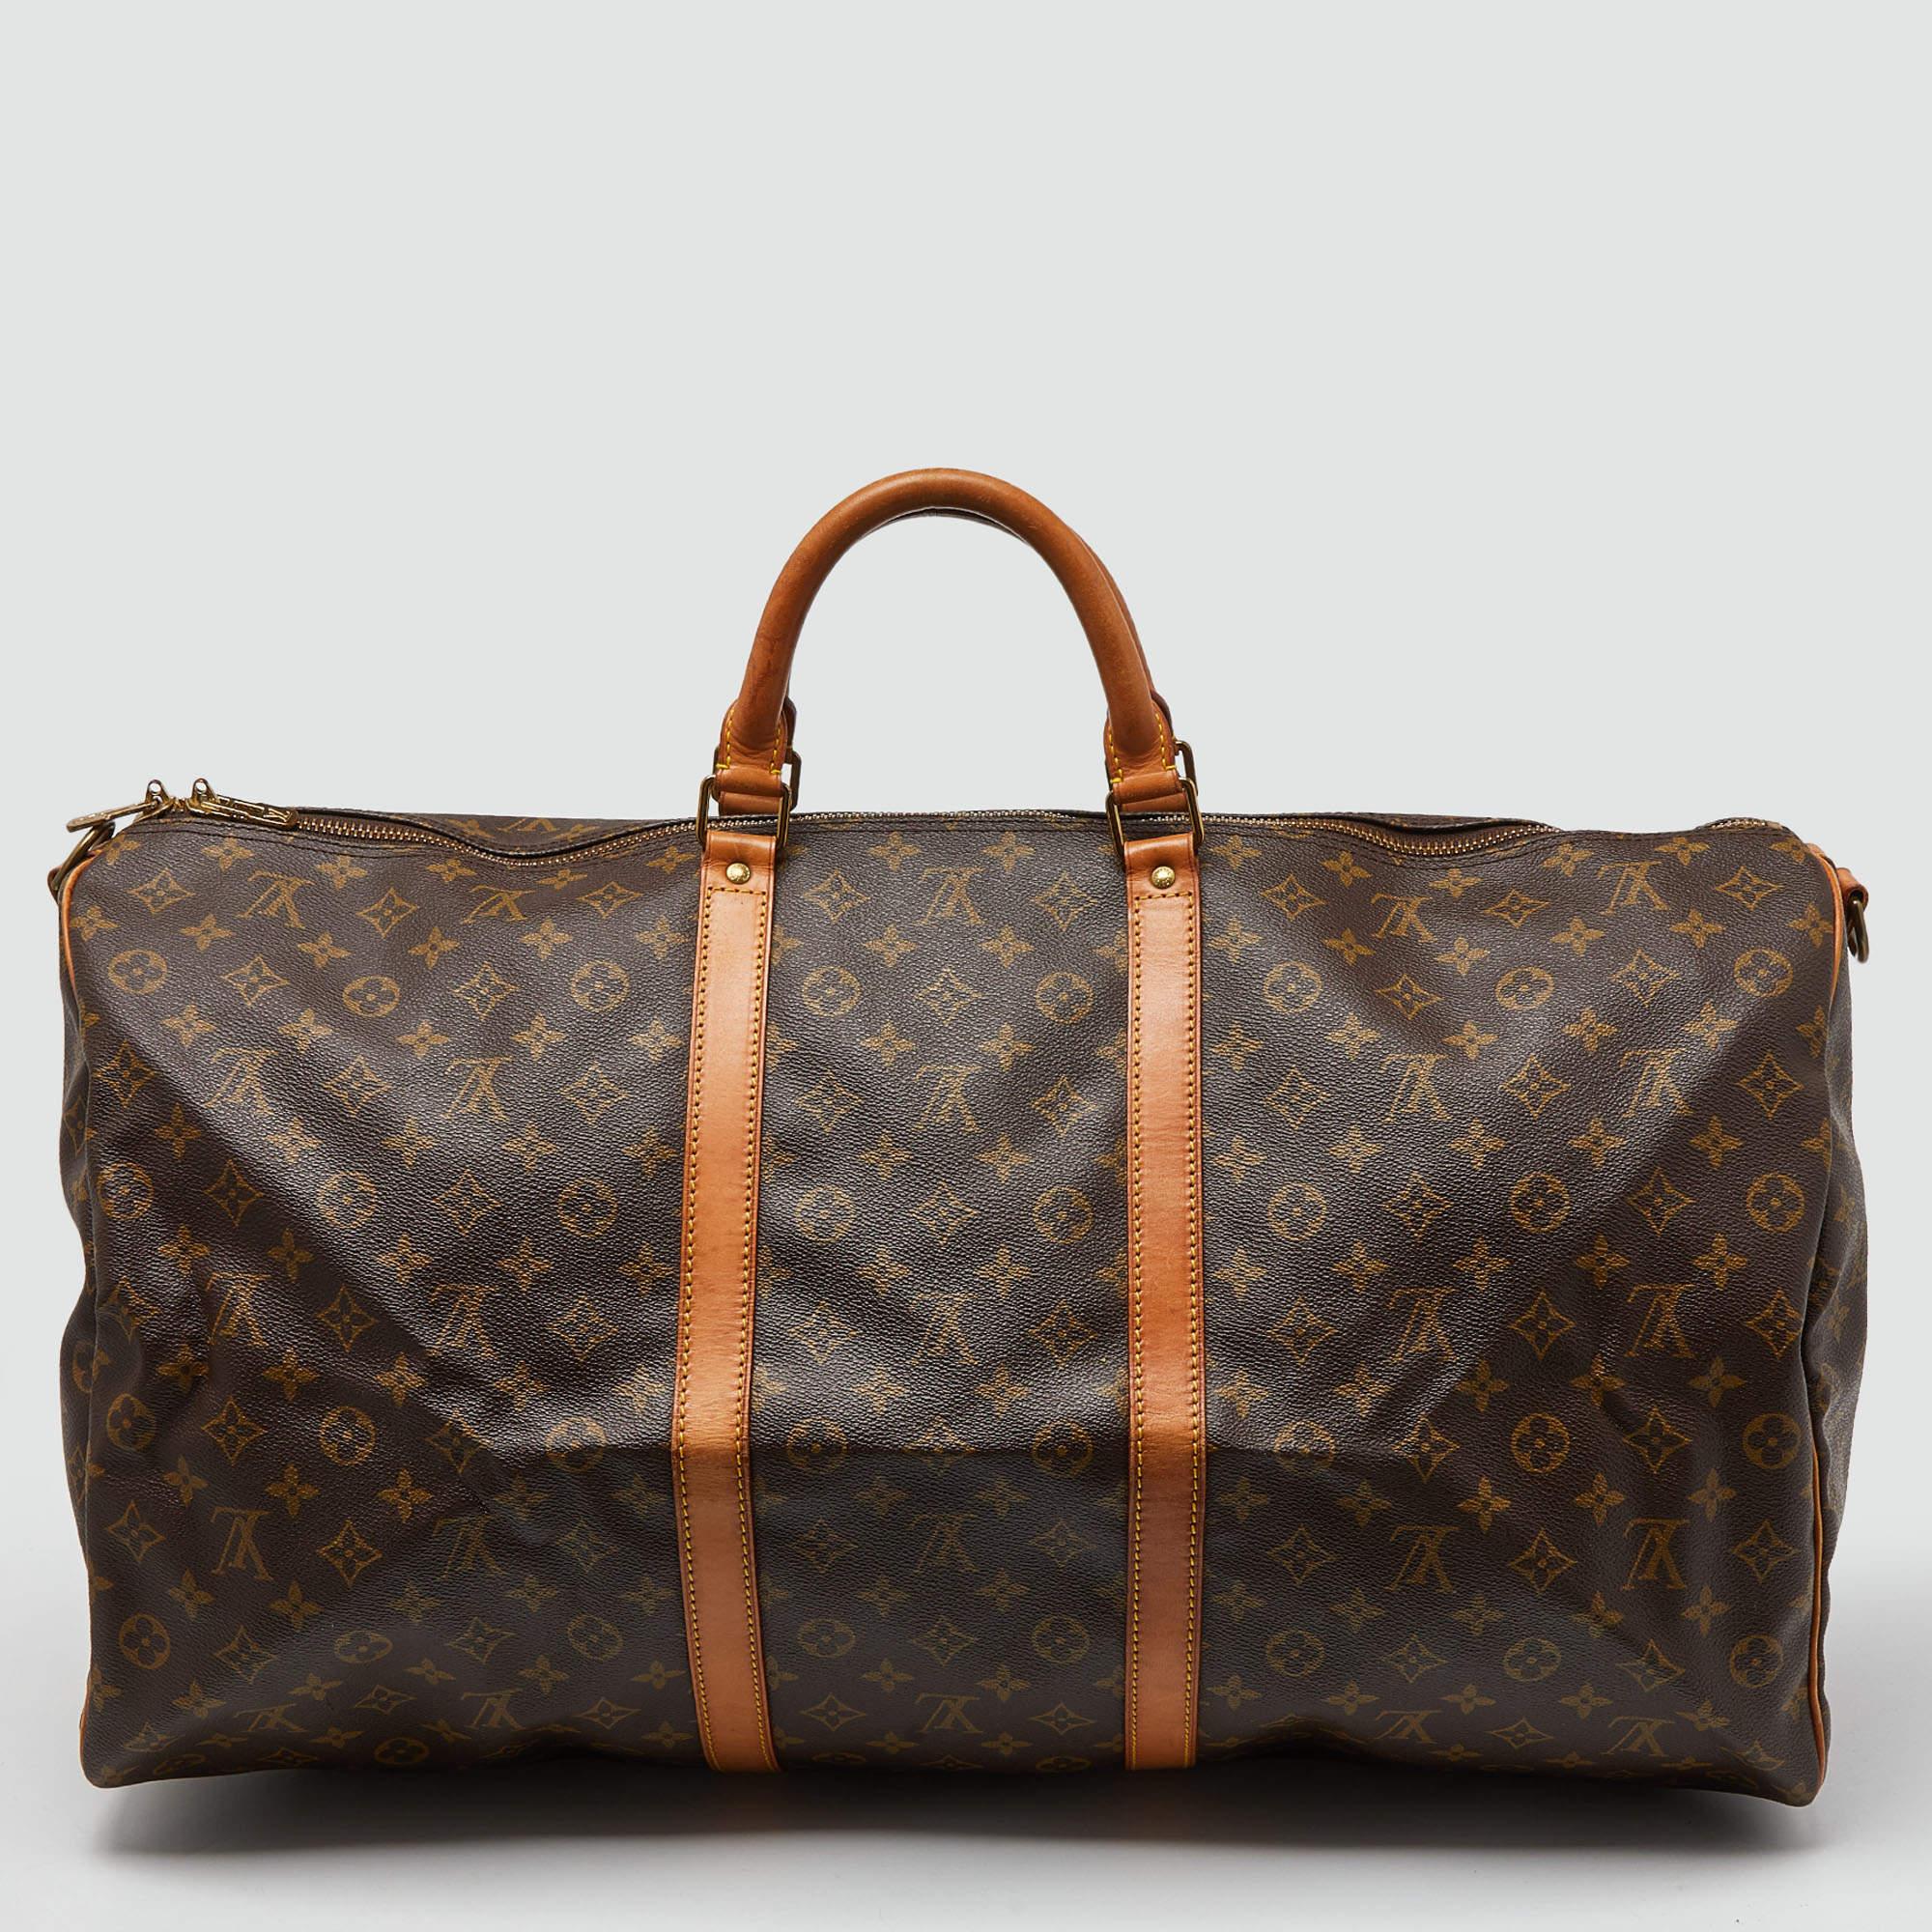 Travel to the places your heart desires with this Louis Vuitton Keepall Bandouliere 60. It is made of high-grade materials in a spacious size.

